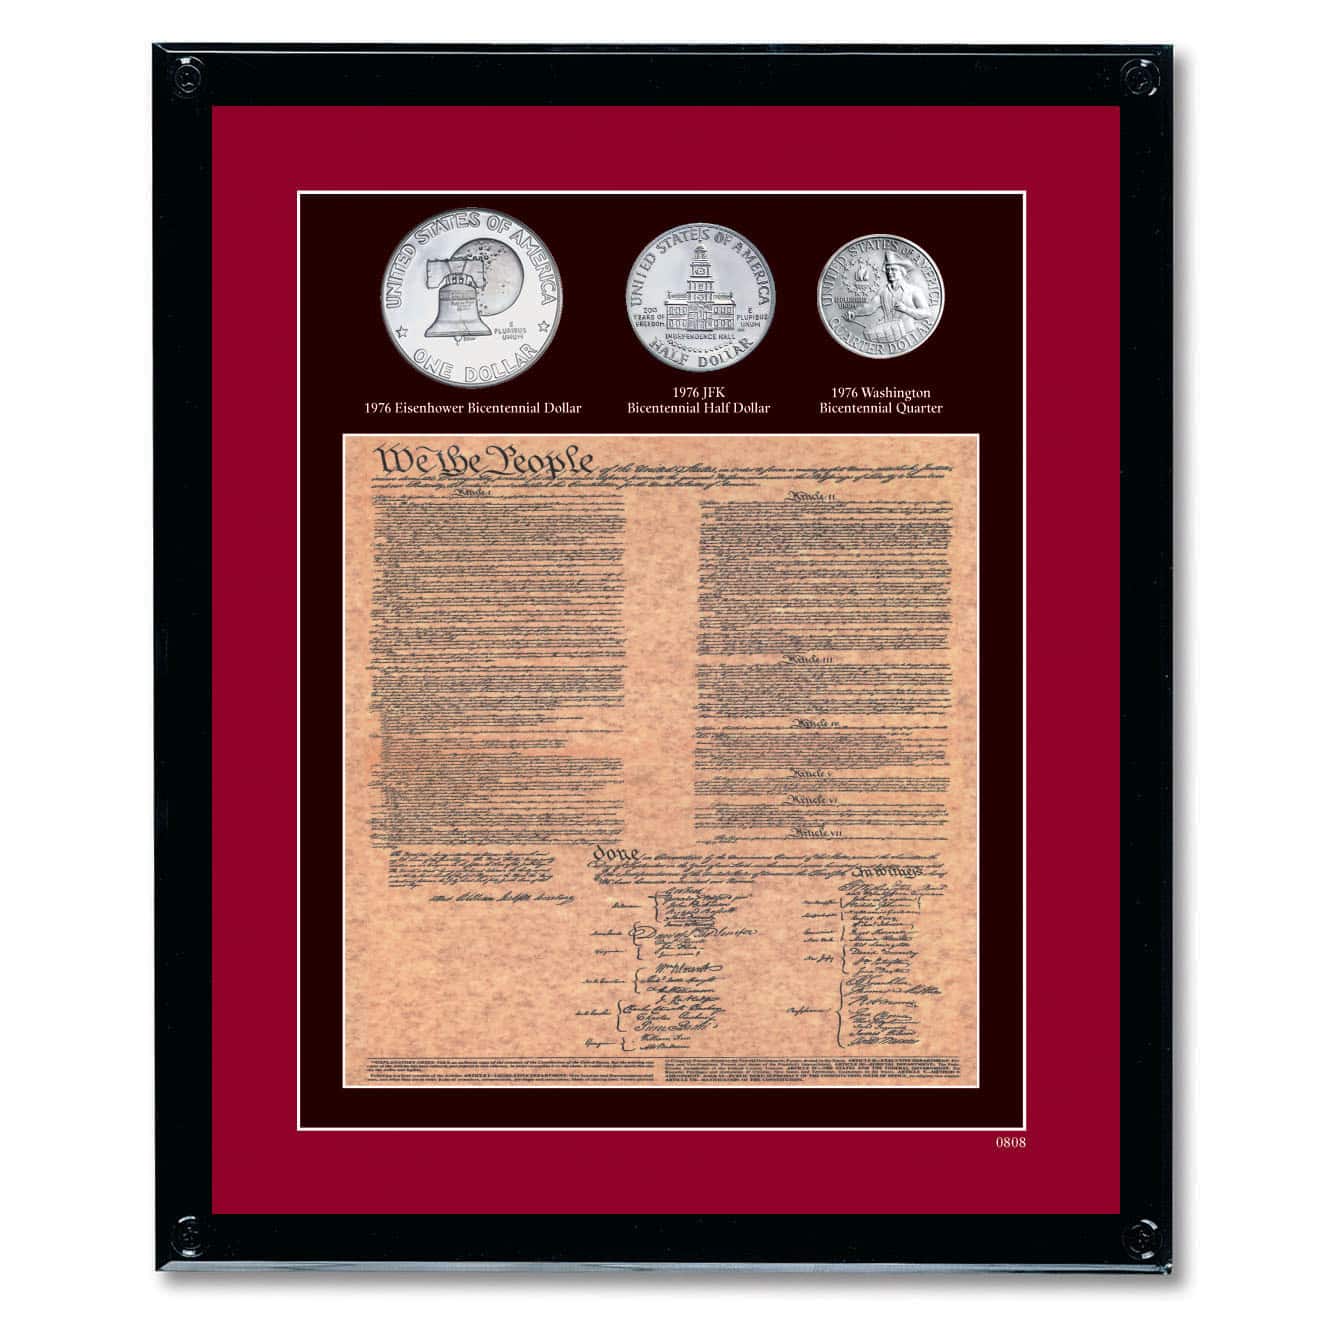 American Coin Treasures Framed U.S. Constitution With All 3 Bicentennial Coins